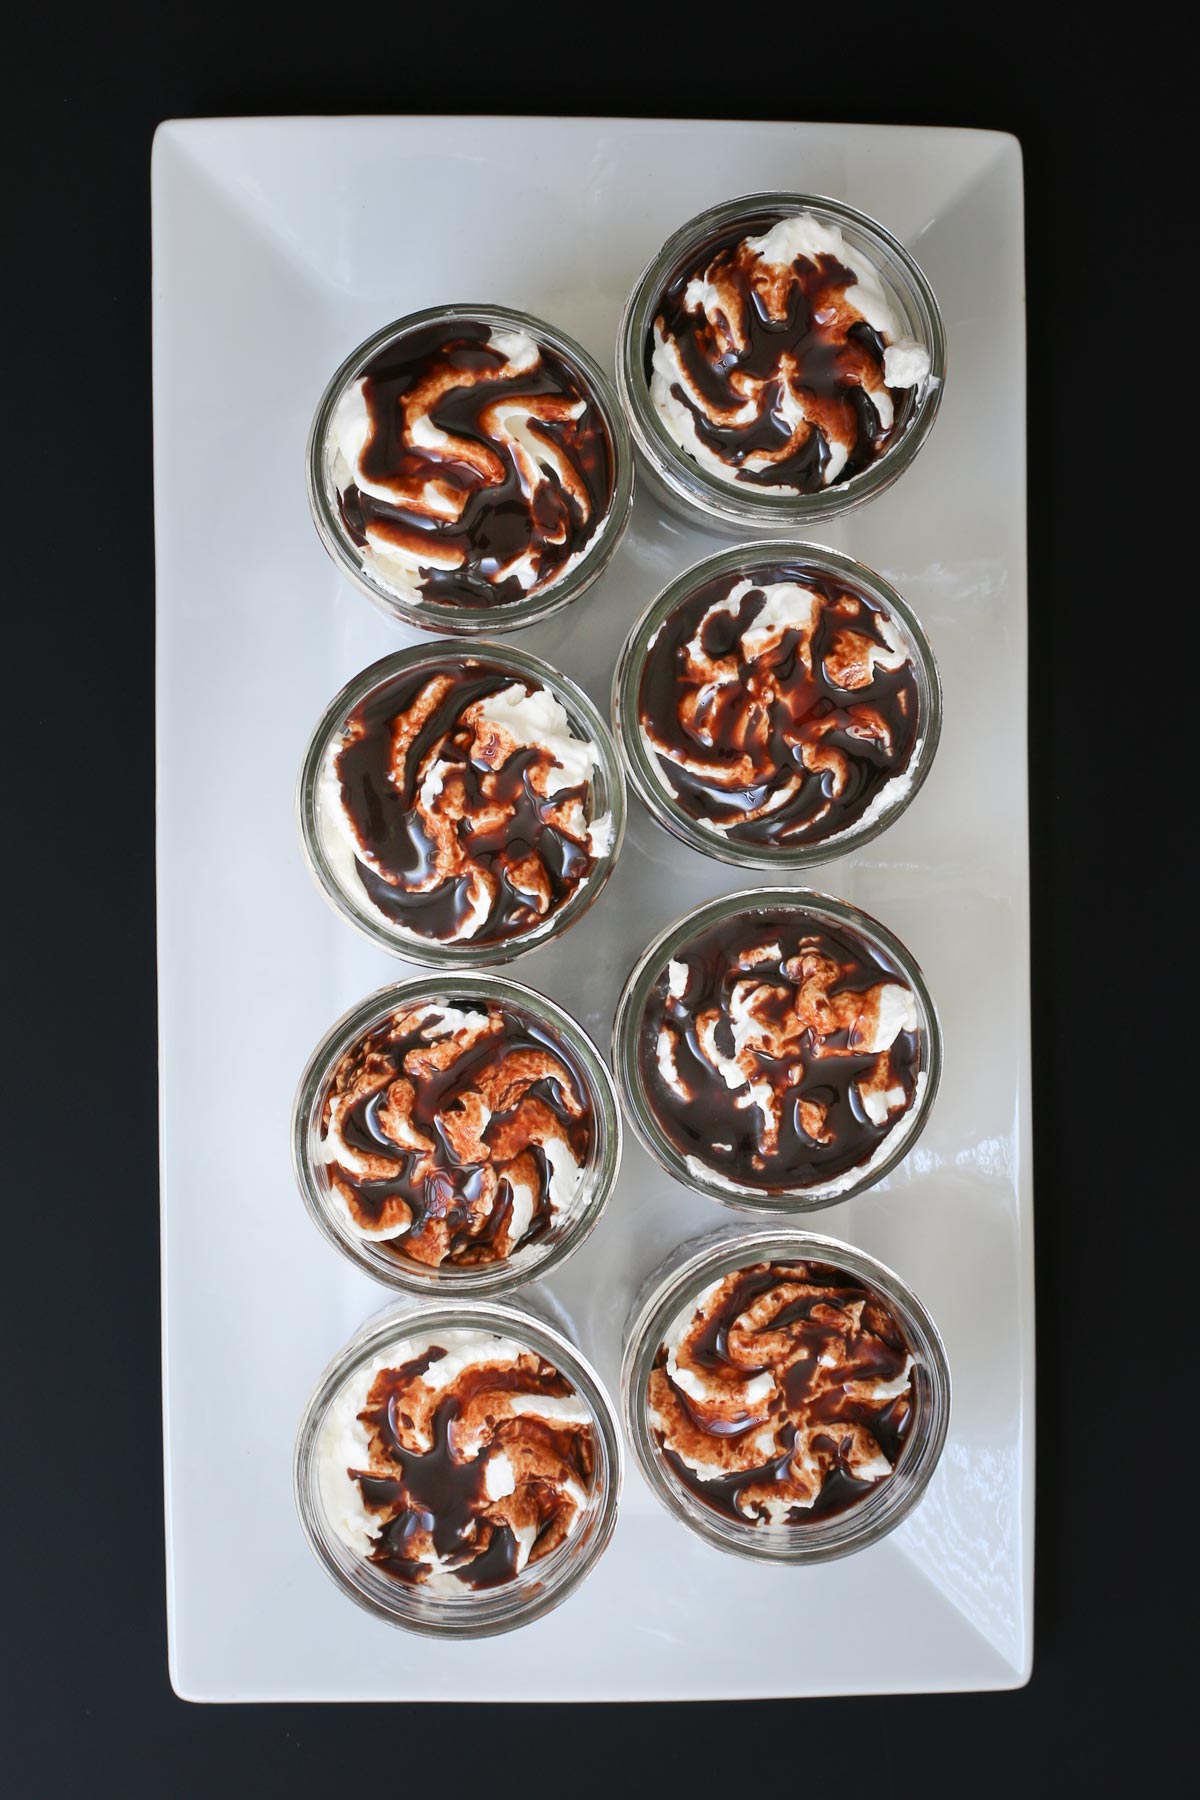 array of 8 chocolate parfait on a white tray.